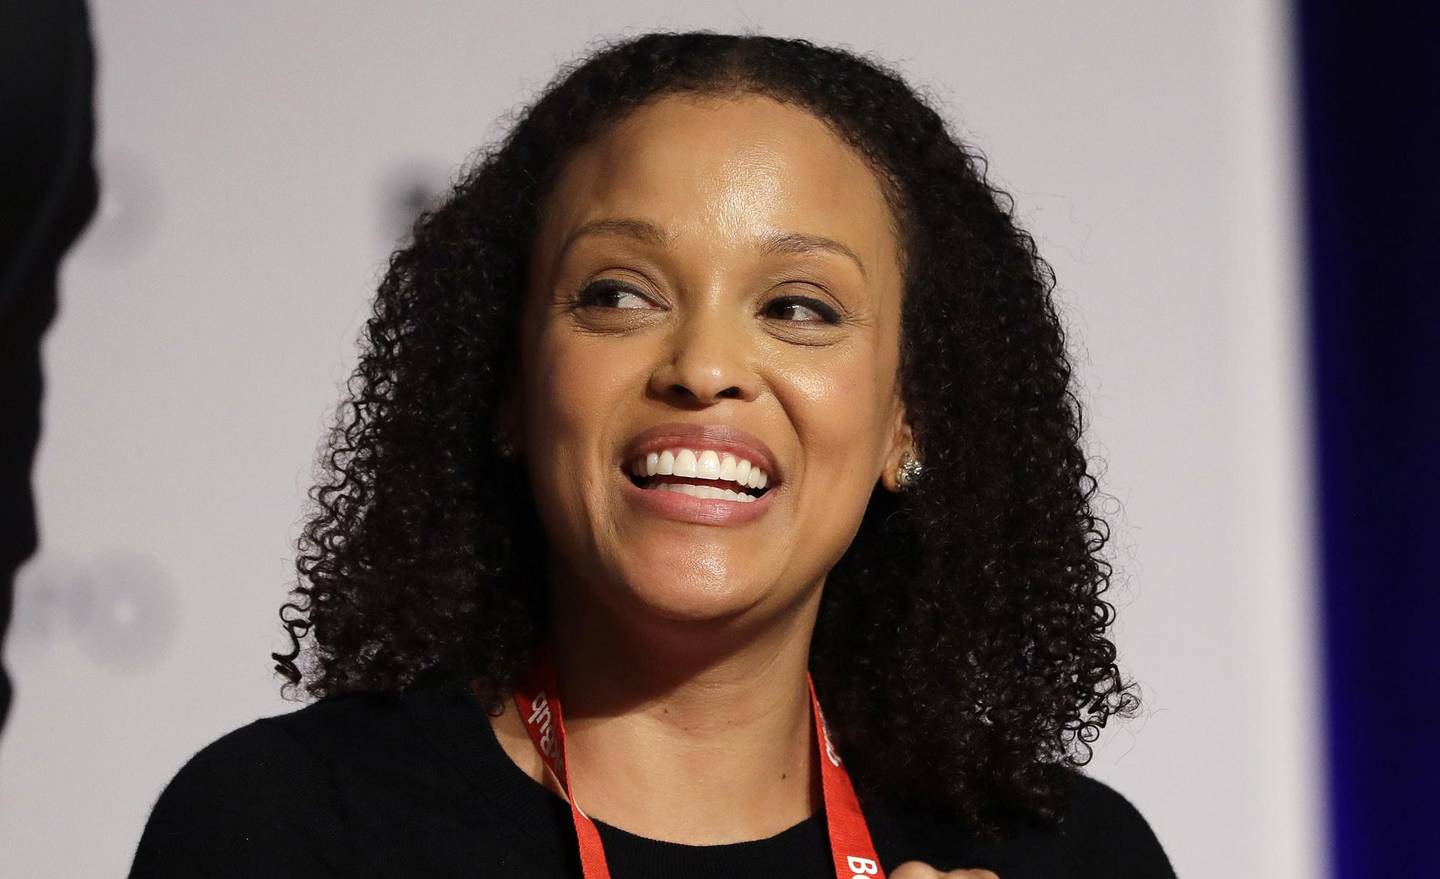 FILE - In this June 1, 2017, file photo, author Jesmyn Ward speaks at Book Expo America in New York. Ward?Äôs ?ÄúSing, Unburied, Sing,?Äù winner of the National Book Award for fiction, is now a nominee for the National Book Critics Circle prize, announced Monday, Jan. 22, 2018. (AP Photo/Mark Lennihan, File)